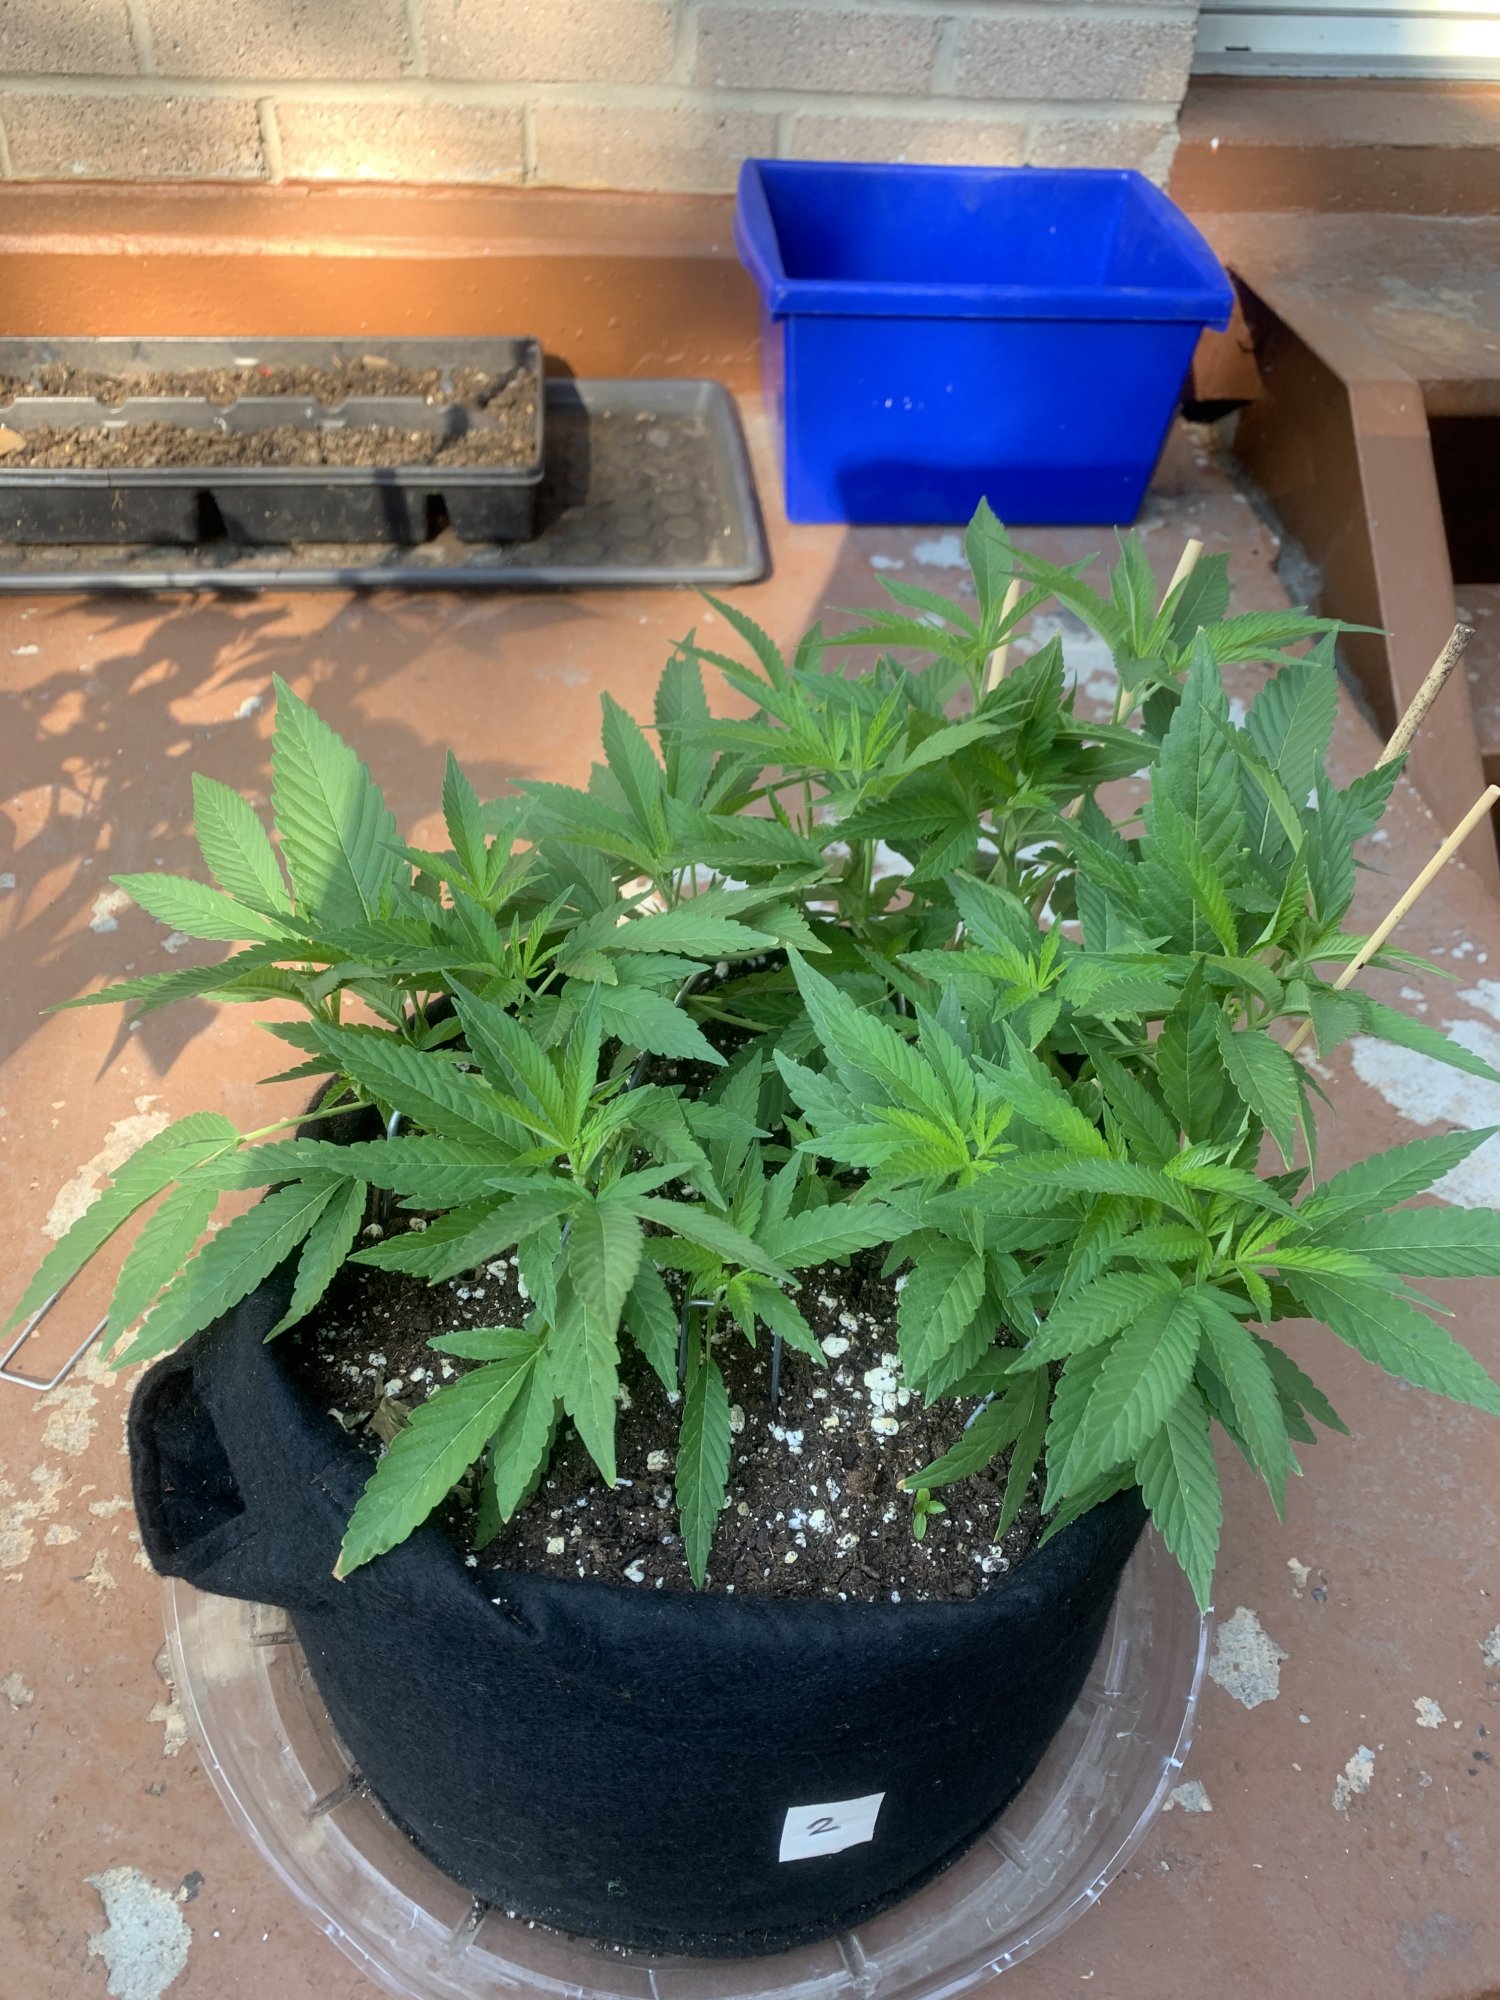 New grower looking for advice on my pink kush clones 4